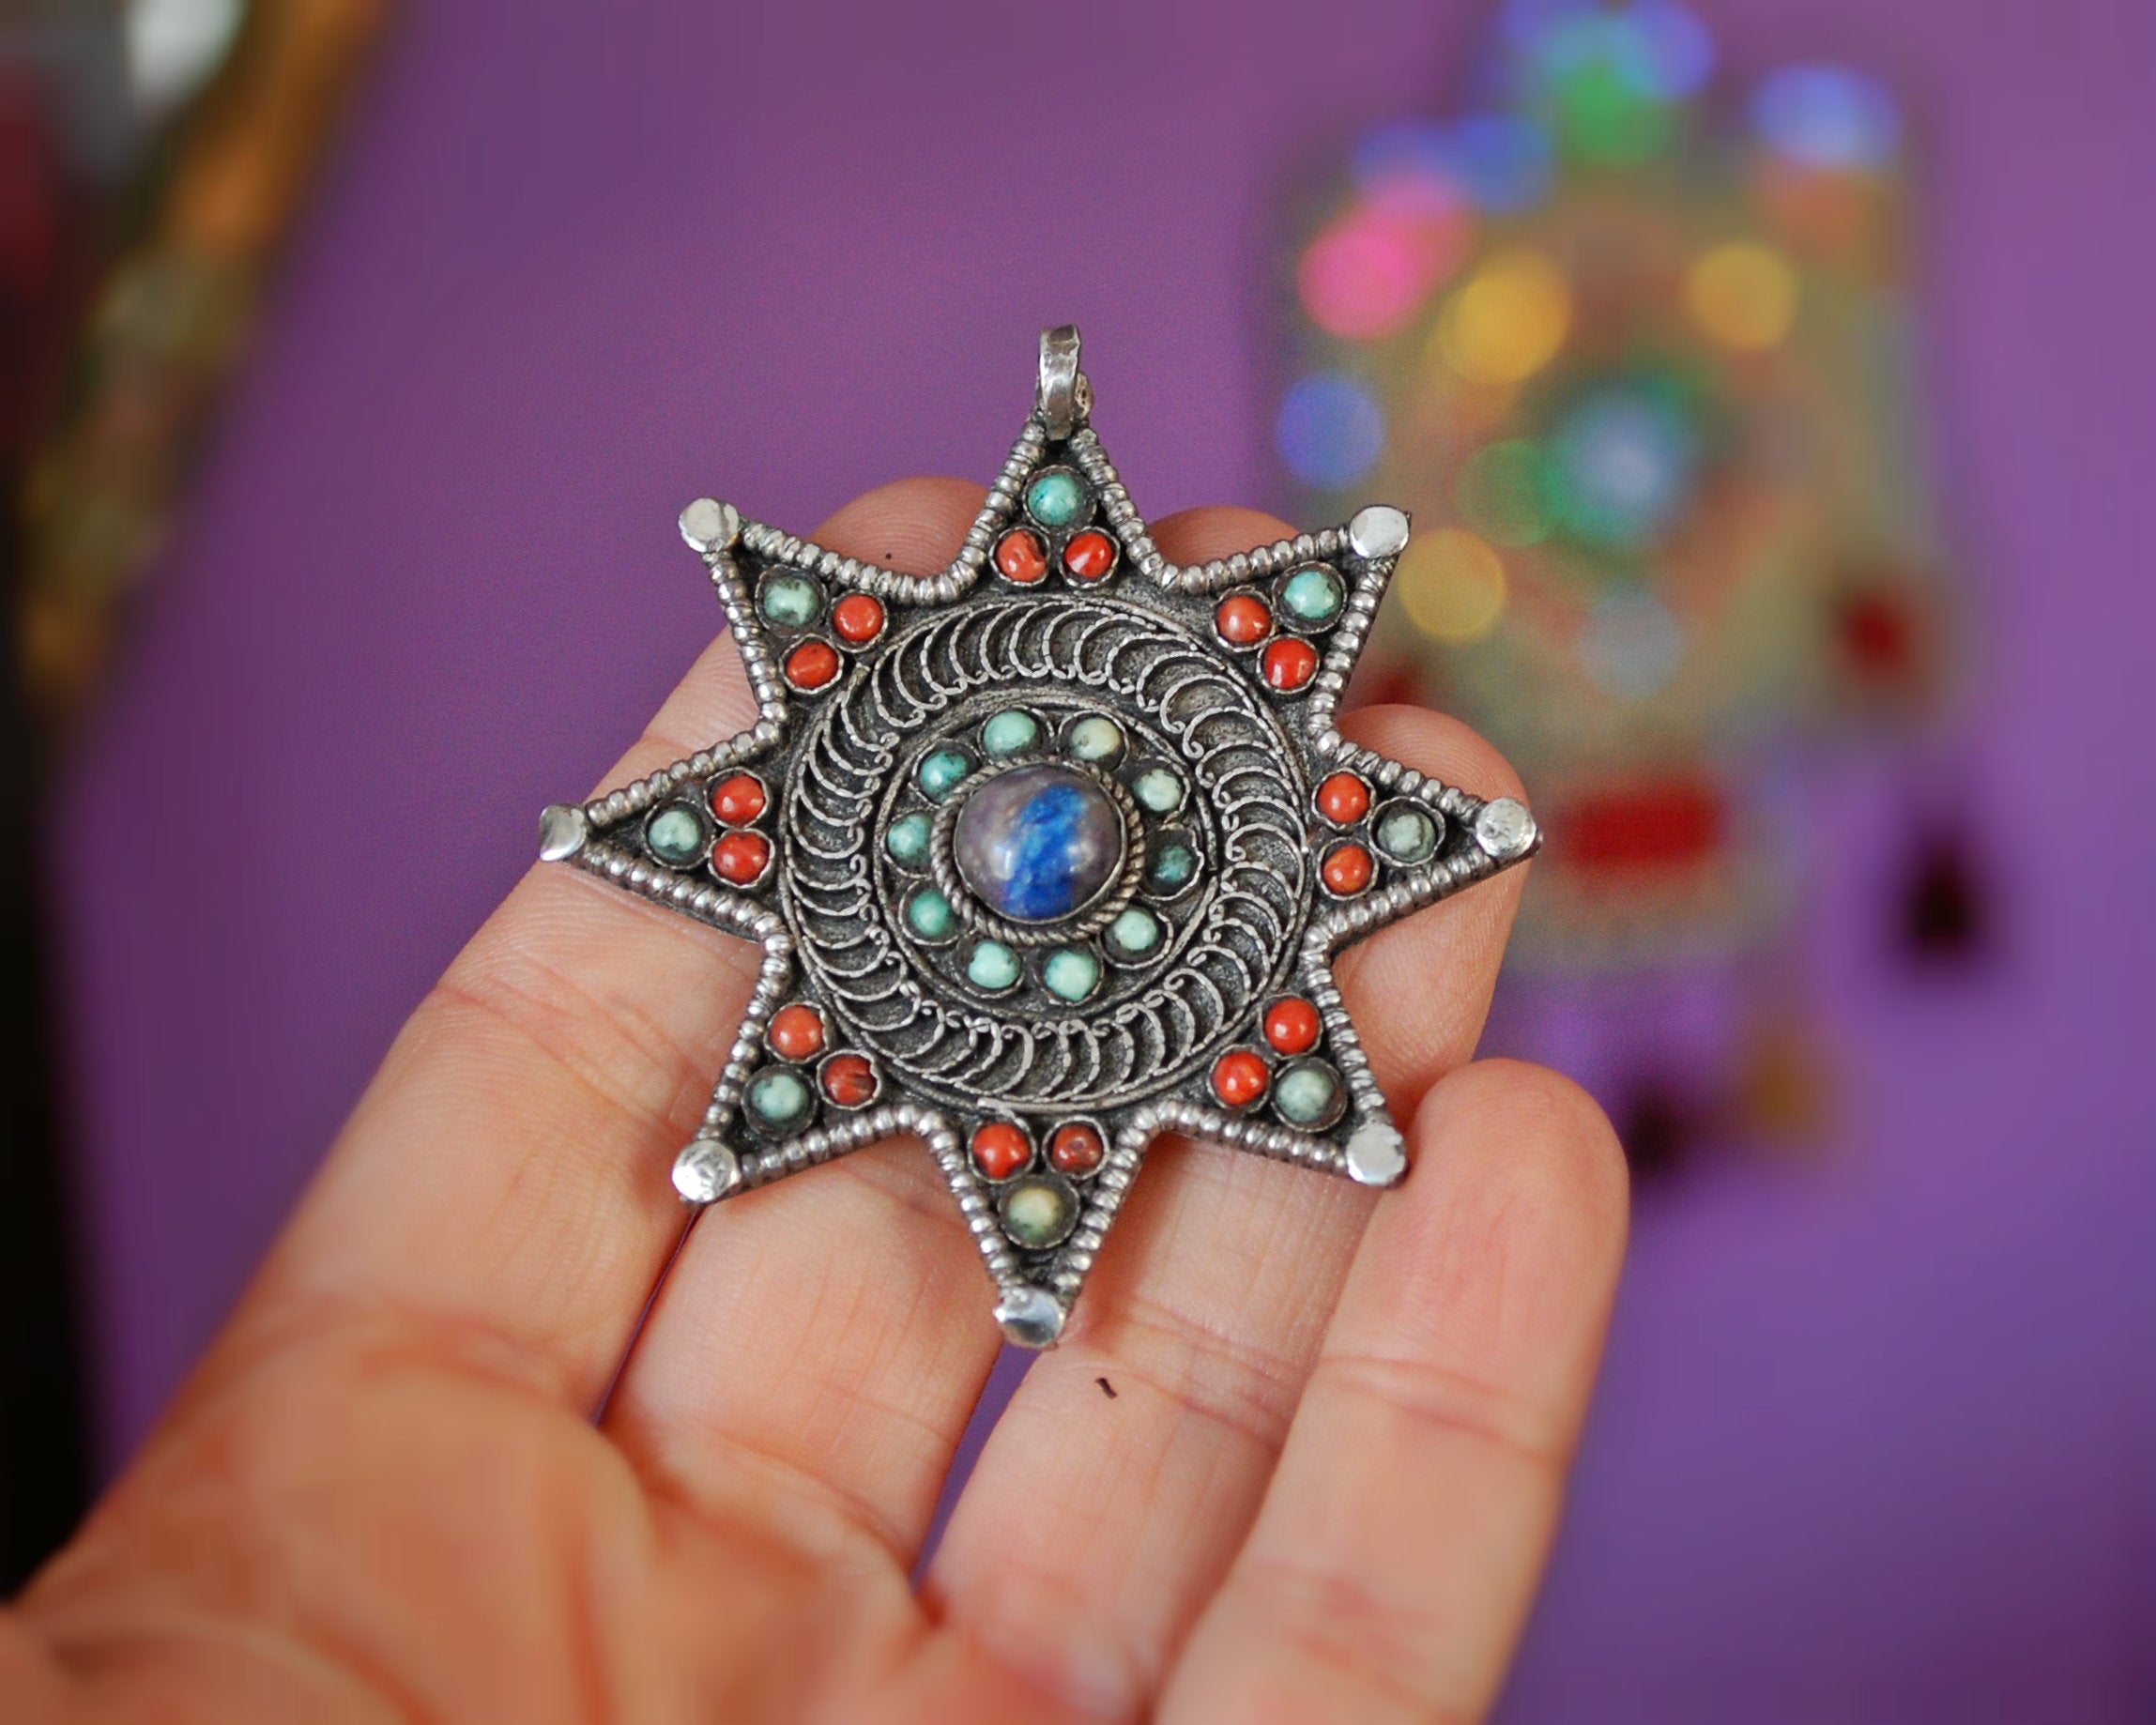 Nepali Star Pendant with Lapis Lazuli, Coral and Turquoise